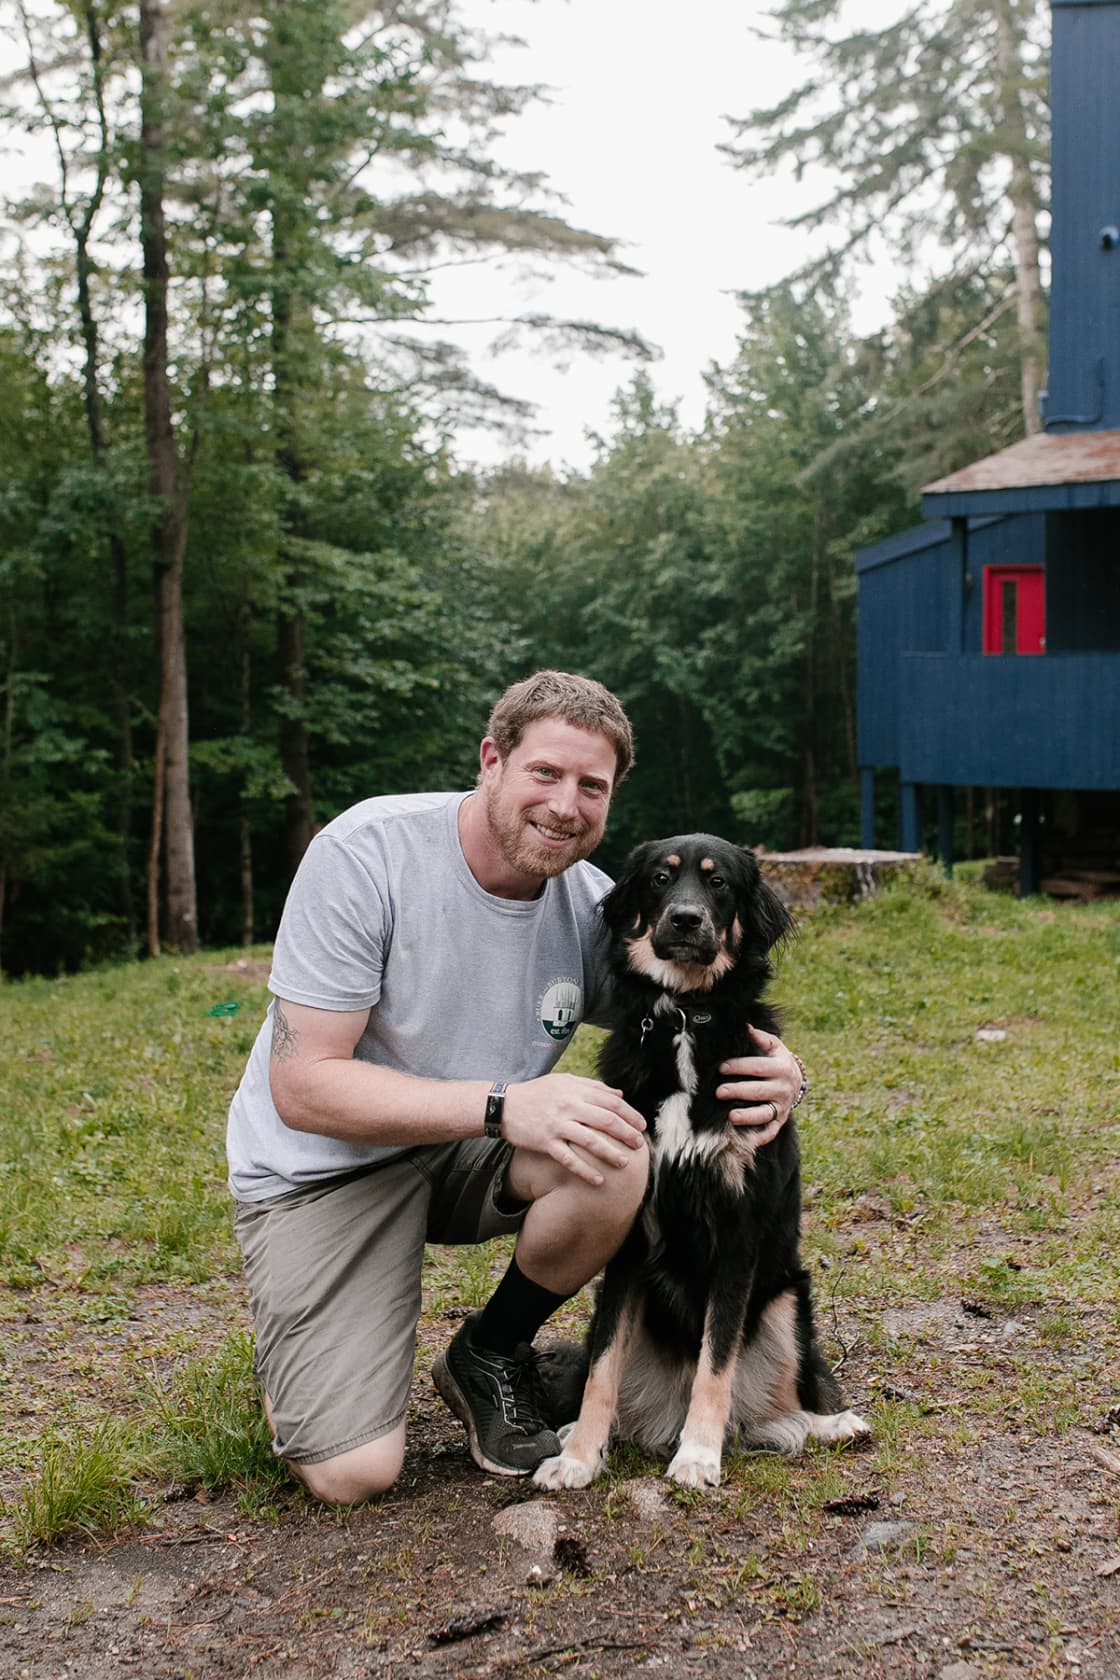 Our host, Jason and his sweet pup, Rocky. There are two other dogs on the property that also greeted us! We loved all the animals there. 